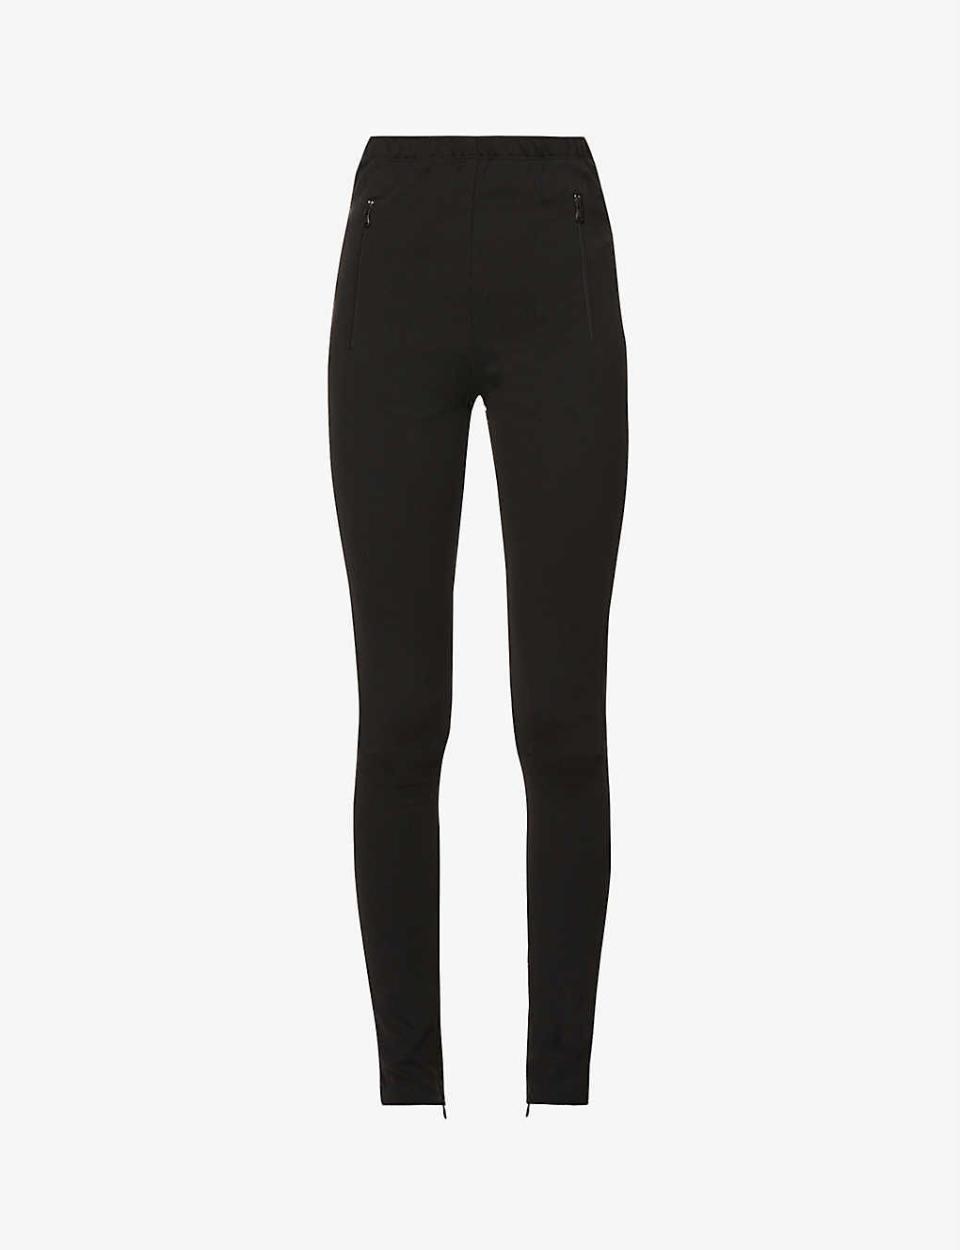 20) Tapered high-rise stretch-woven leggings